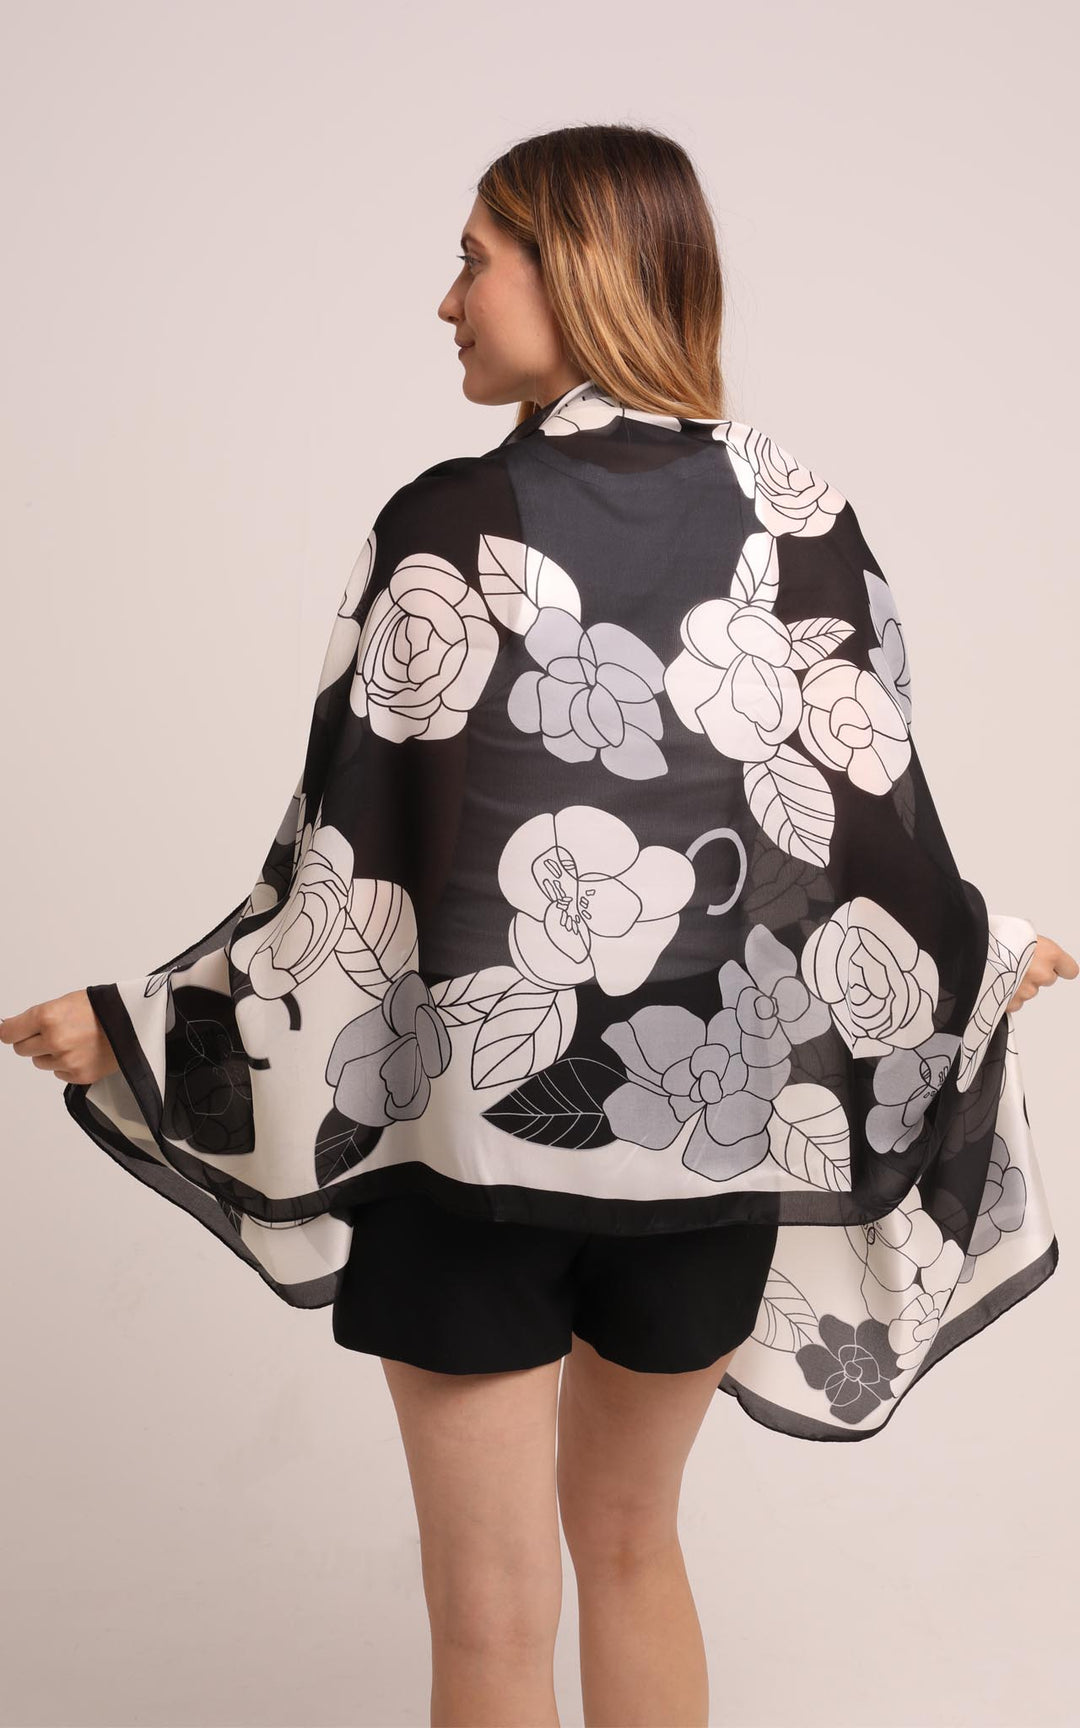 Silk Scarf in Black and White Floral Print